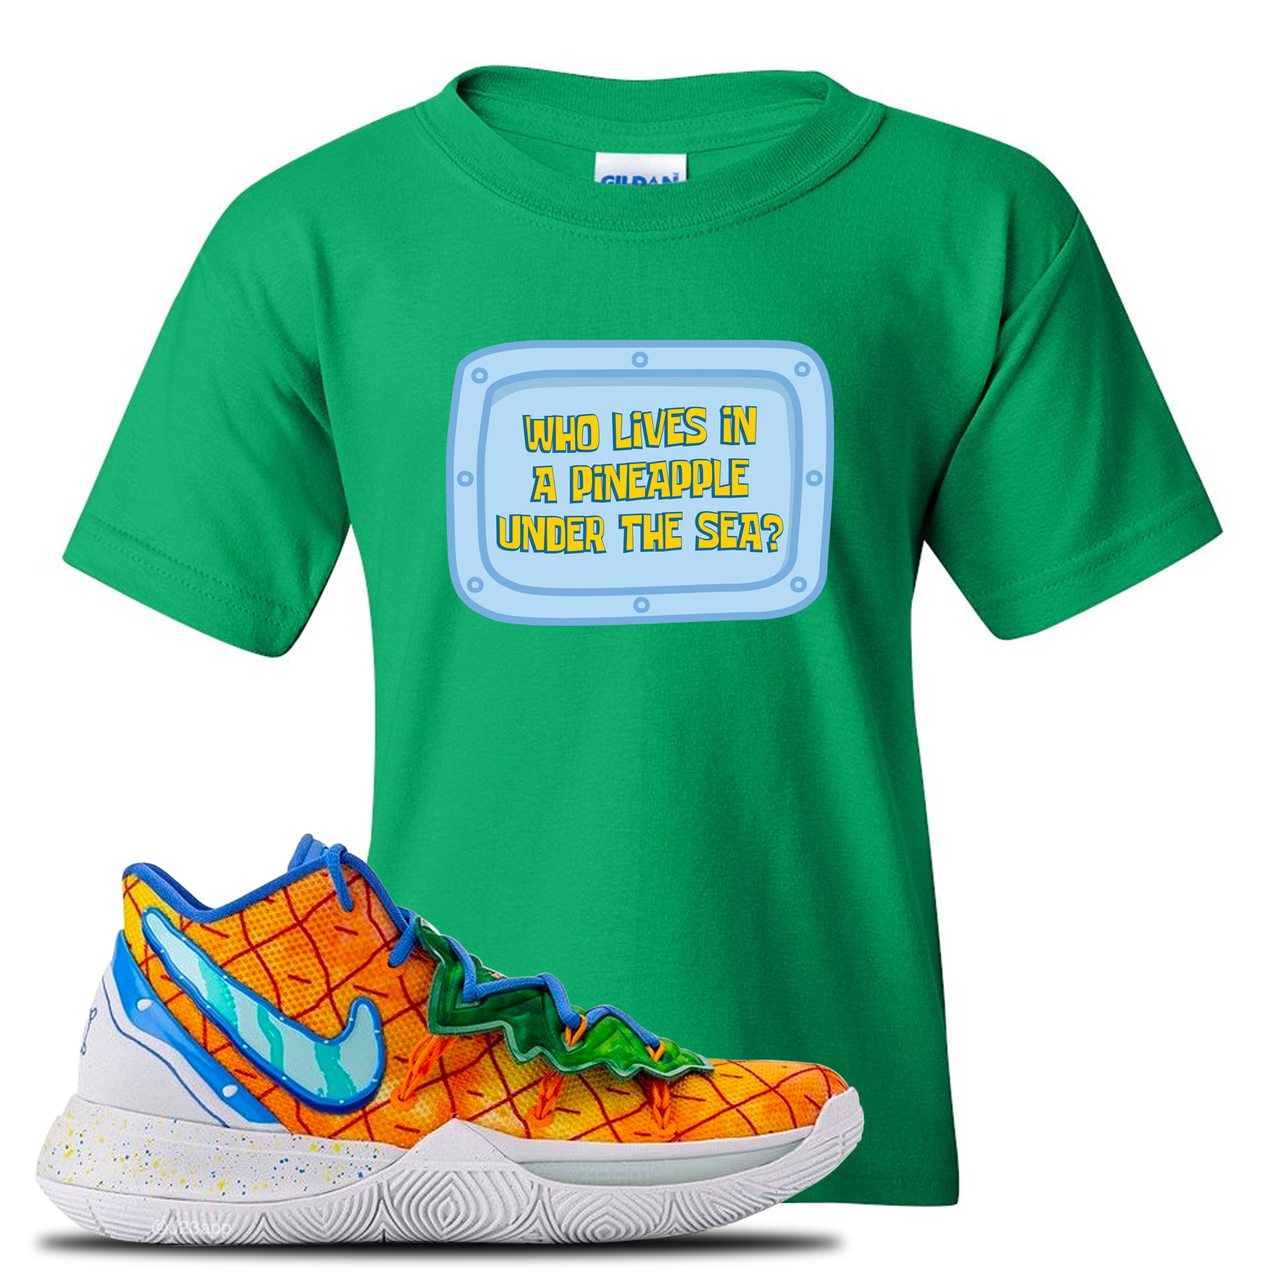 Kyrie 5 Pineapple House Who Lives in a Pineapple Under the Sea? Irish Green Sneaker Hook Up Kid's T-Shirt